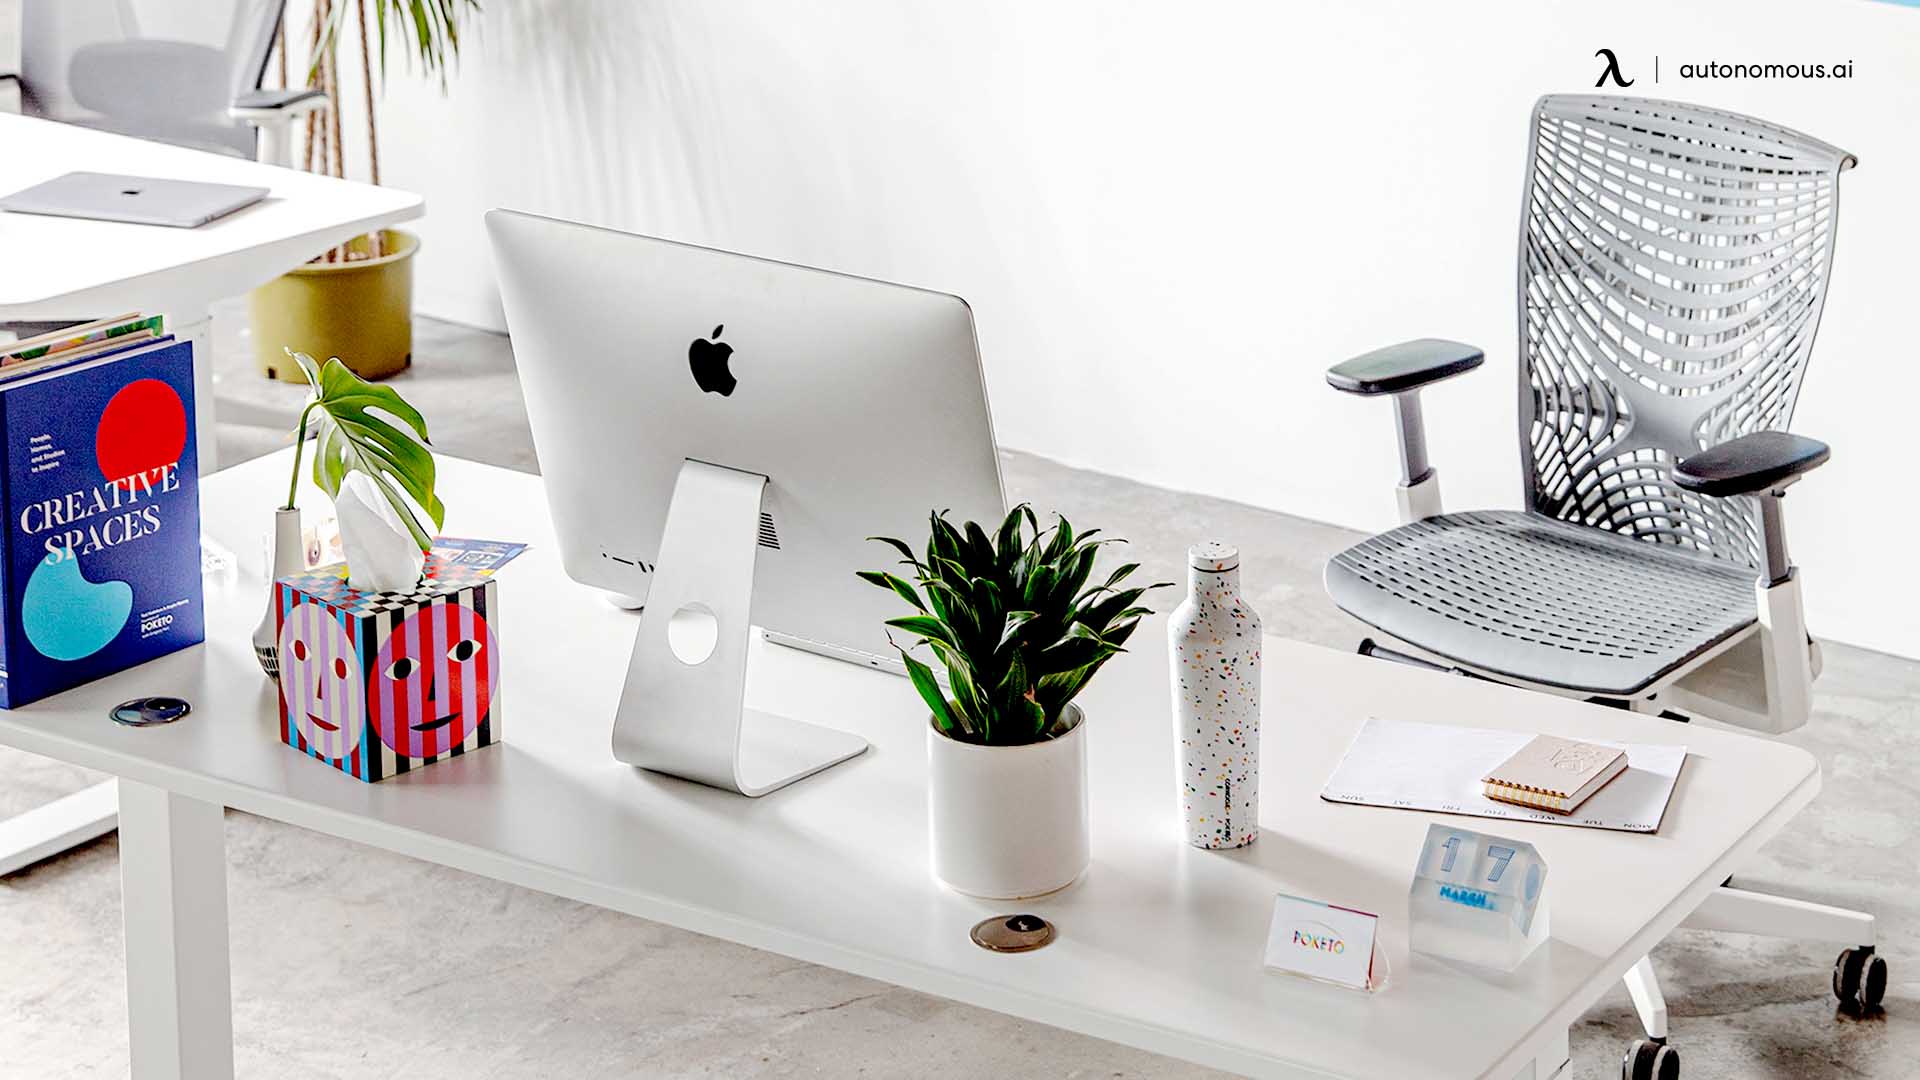 What Can a Creative Work Desk Do for You